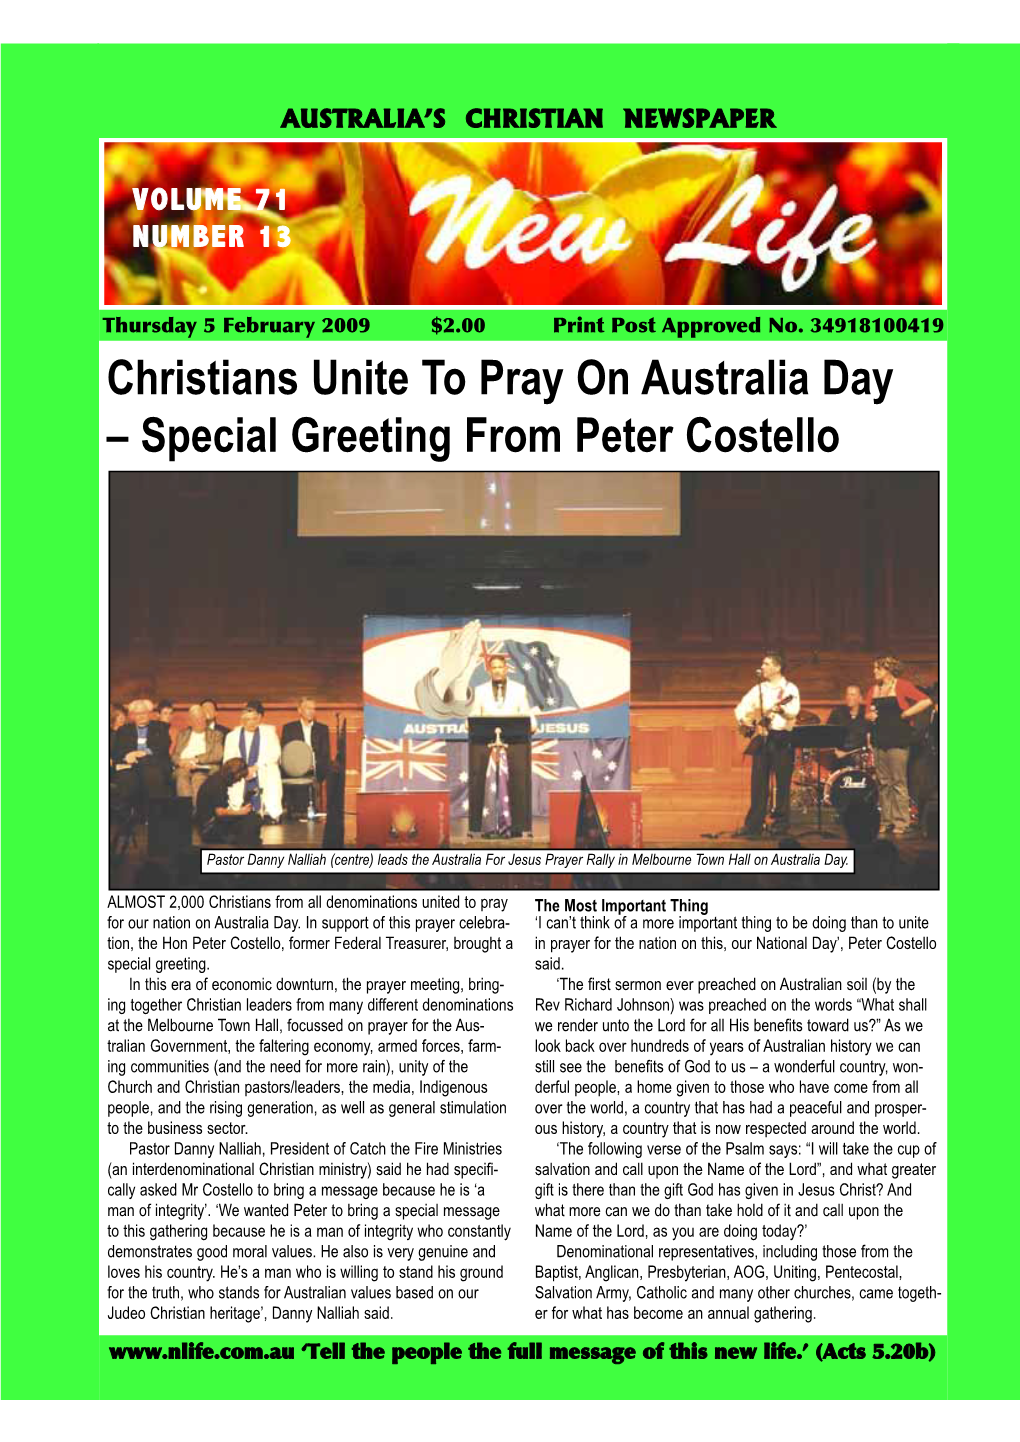 Christians Unite to Pray on Australia Day – Special Greeting from Peter Costello